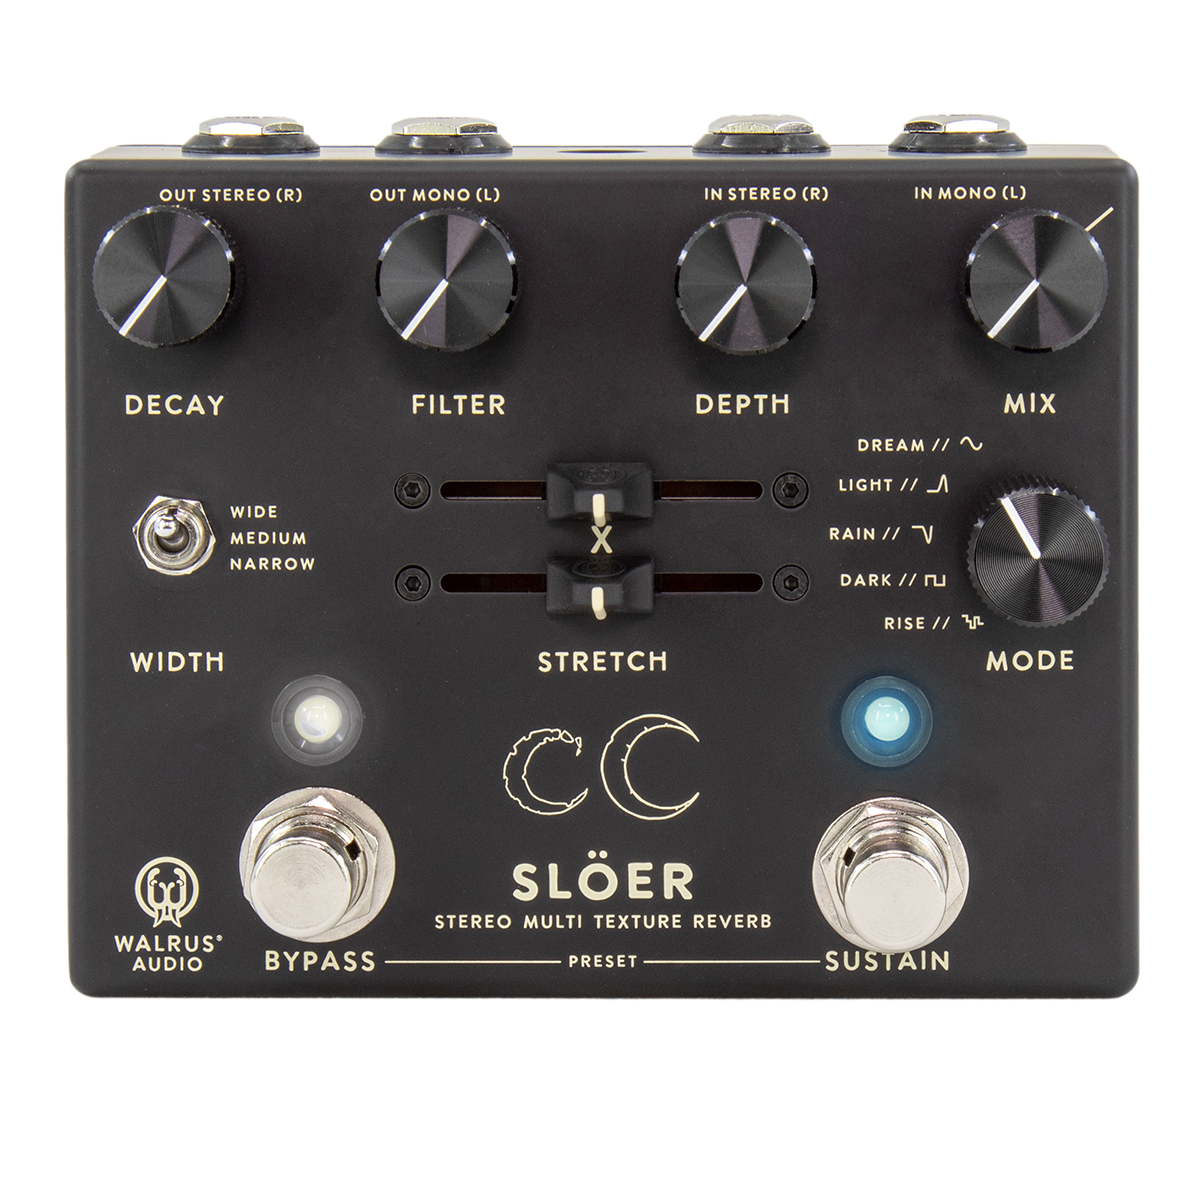 WALRUS AUDIO Sloer Stereo Ambient Reverb Black コンパクト